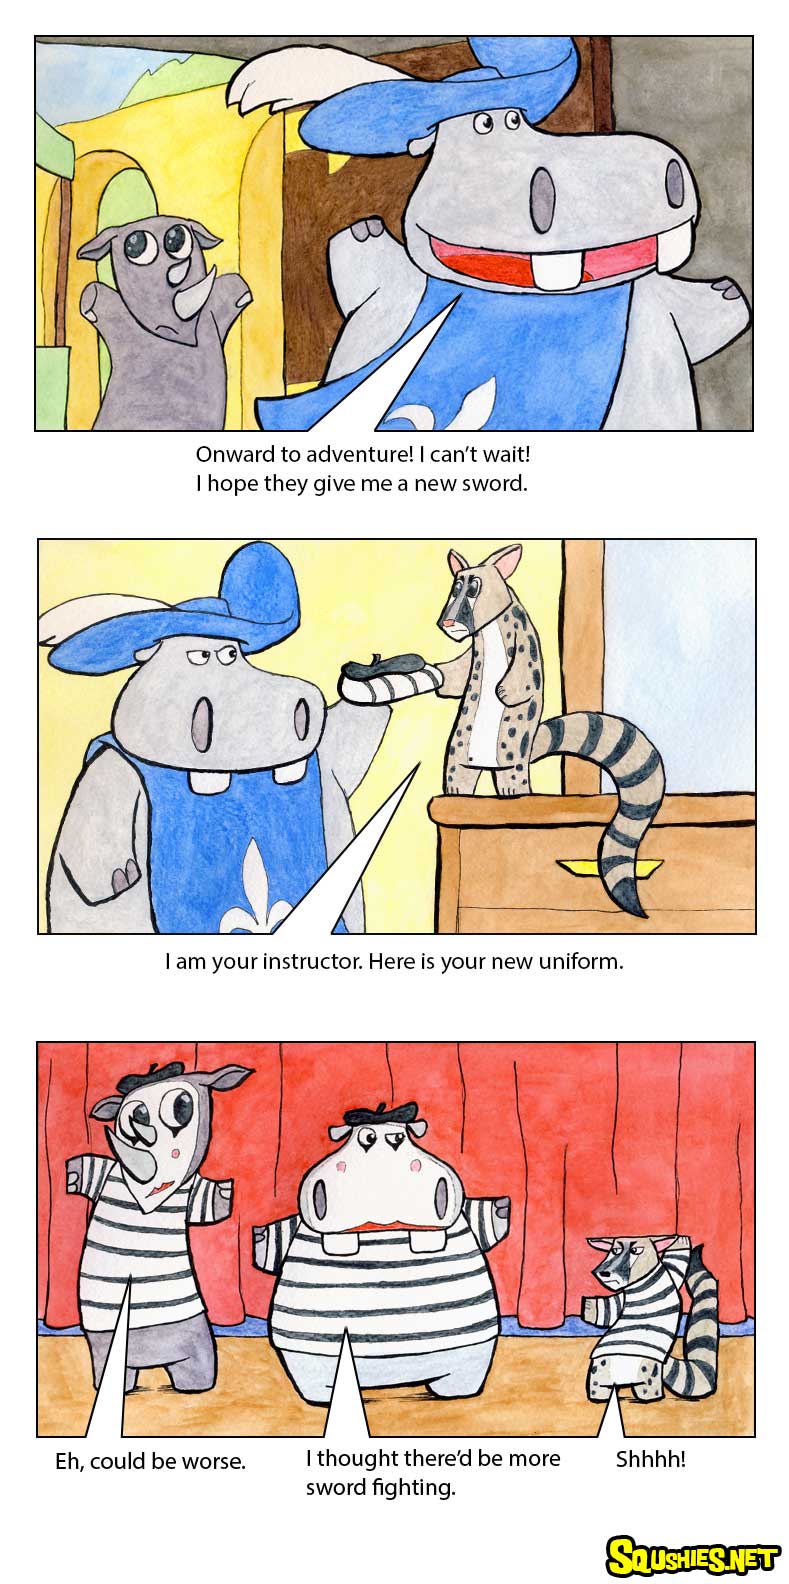 The Squshies web comic! Read about the adventures of Beauregard the Hippo and Reginald the Rhino - Three Musketeers - Week 5